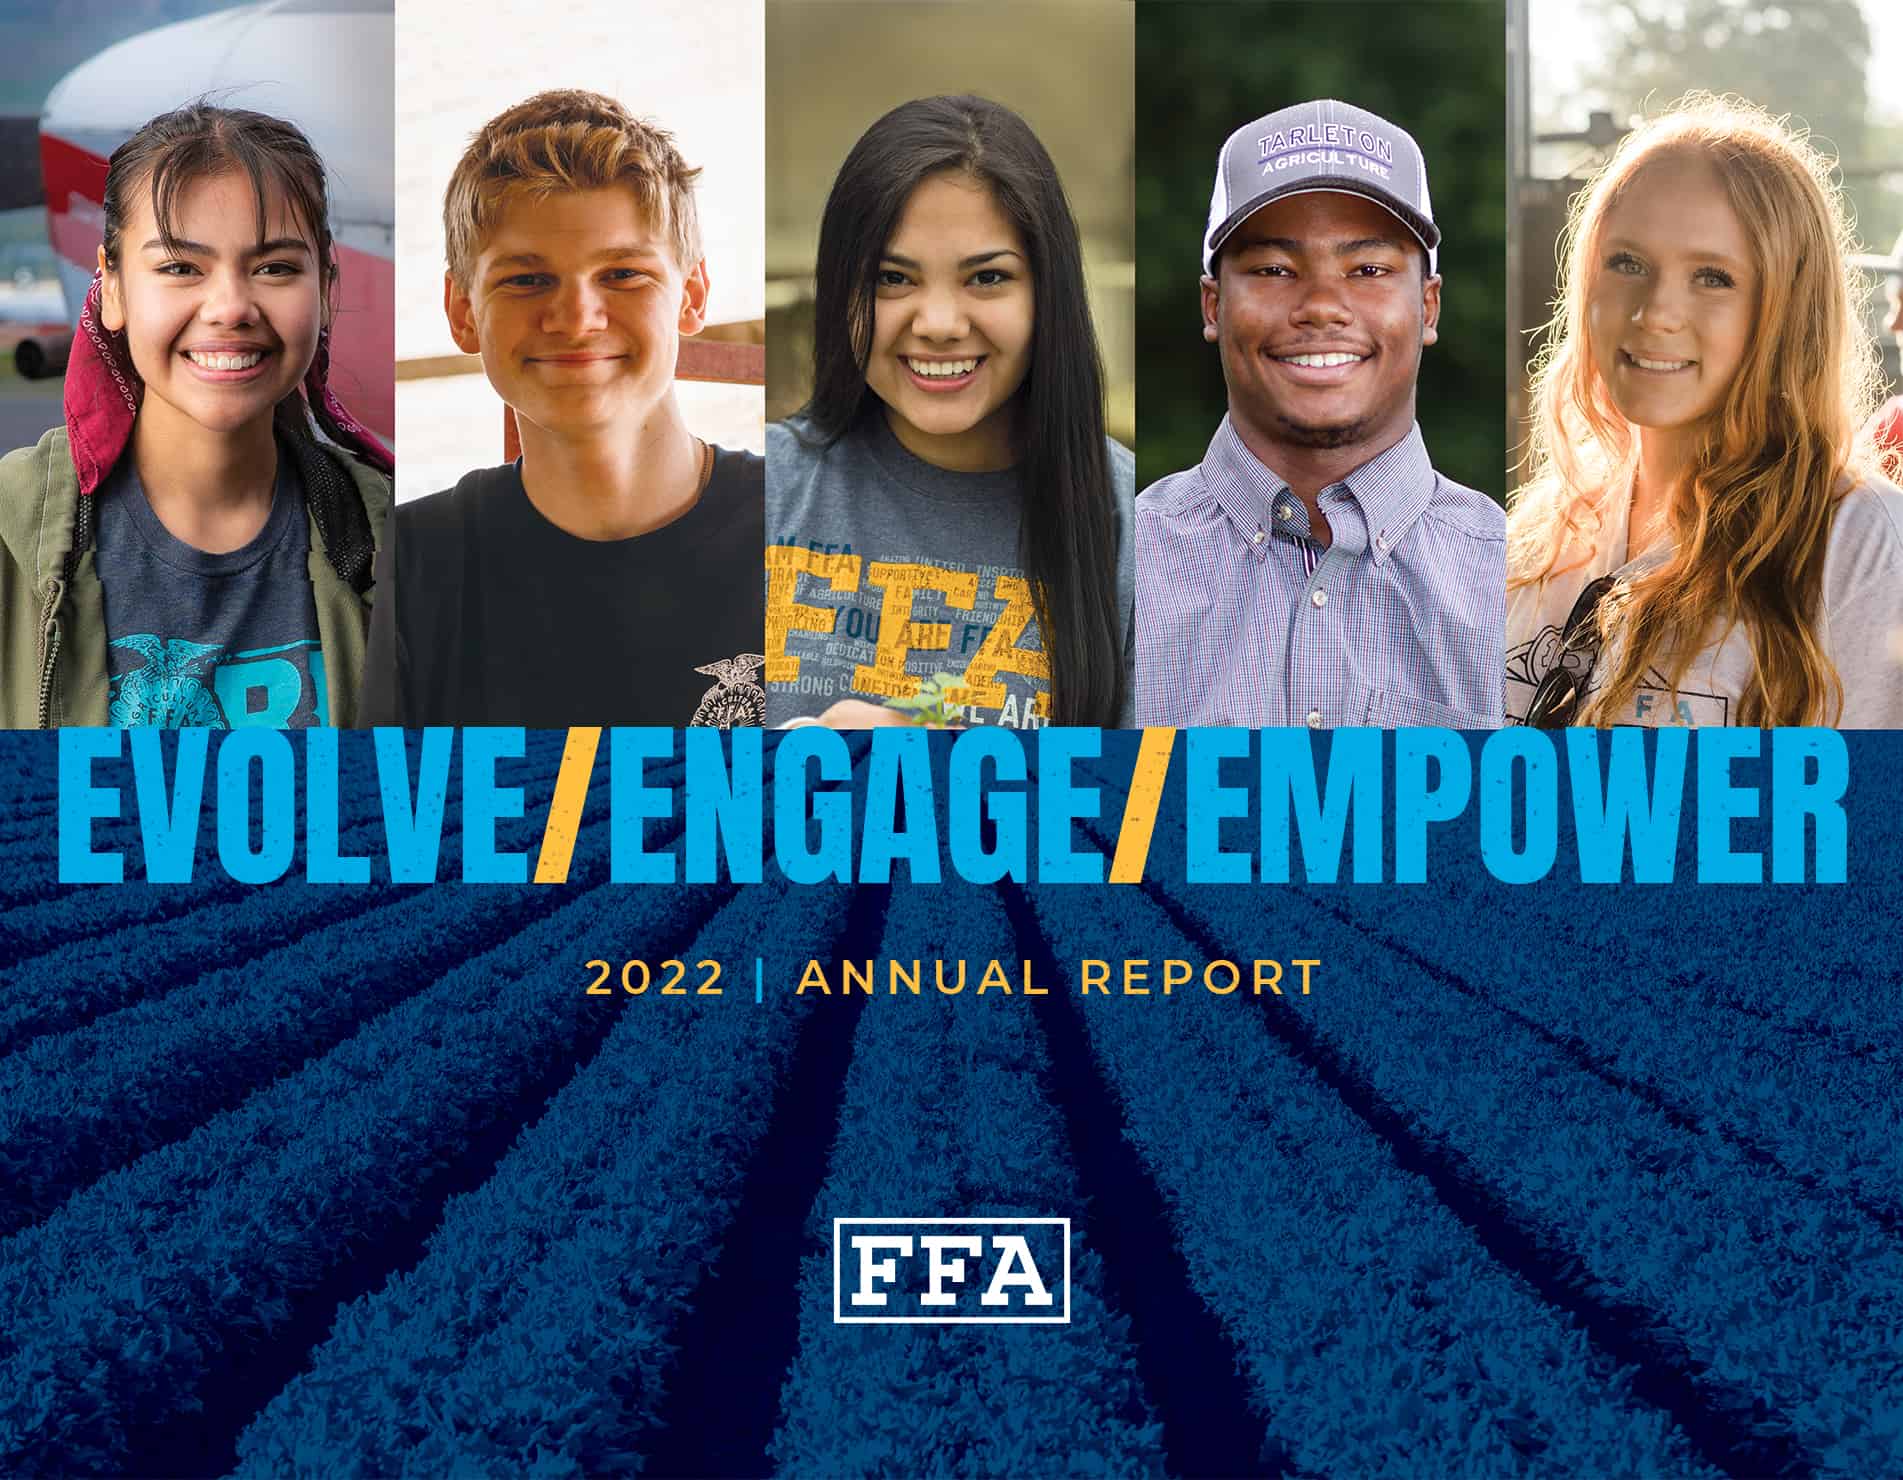 Five FFA Members | Evolve/Engage/Empower | 2022 Annual Report Hero Image